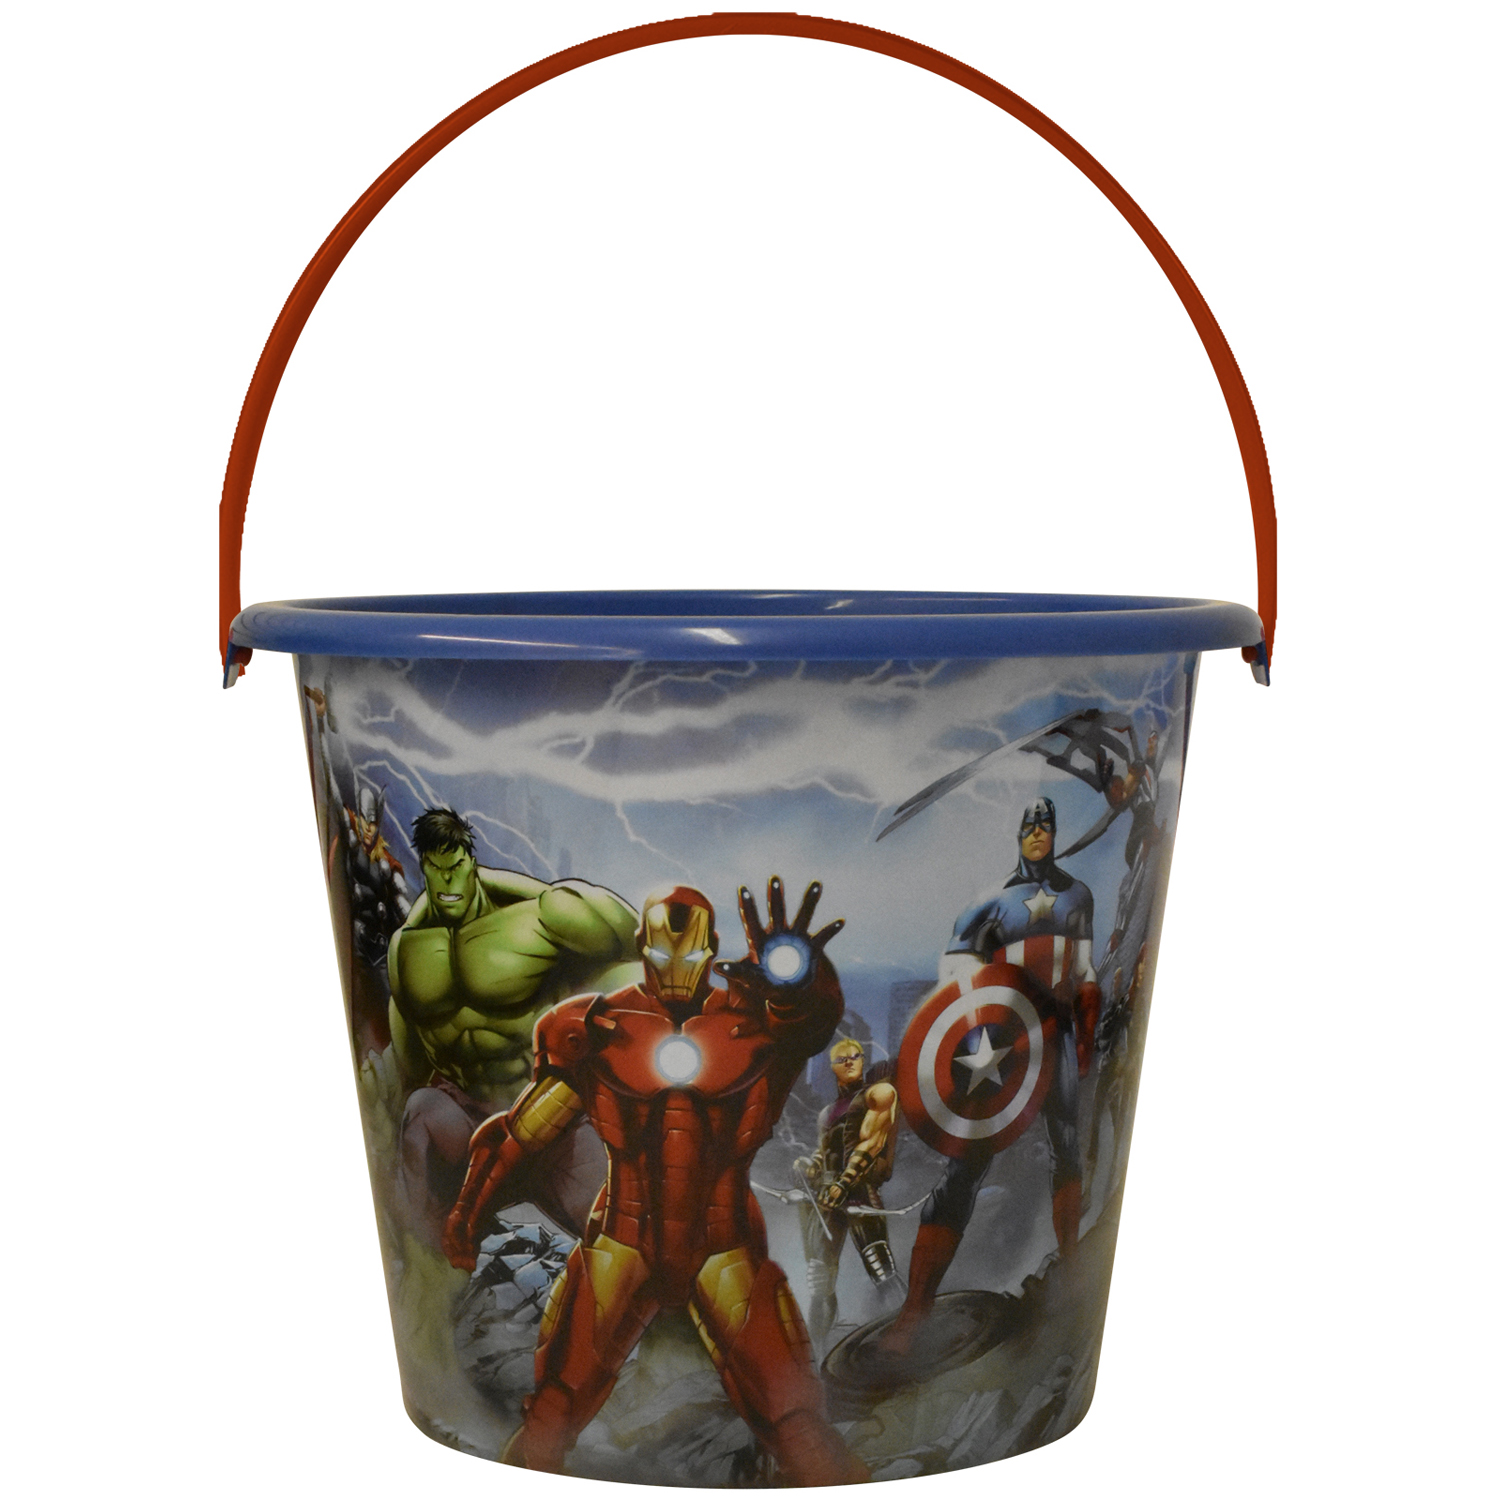 Easter Avengers Pail - image 1 of 2